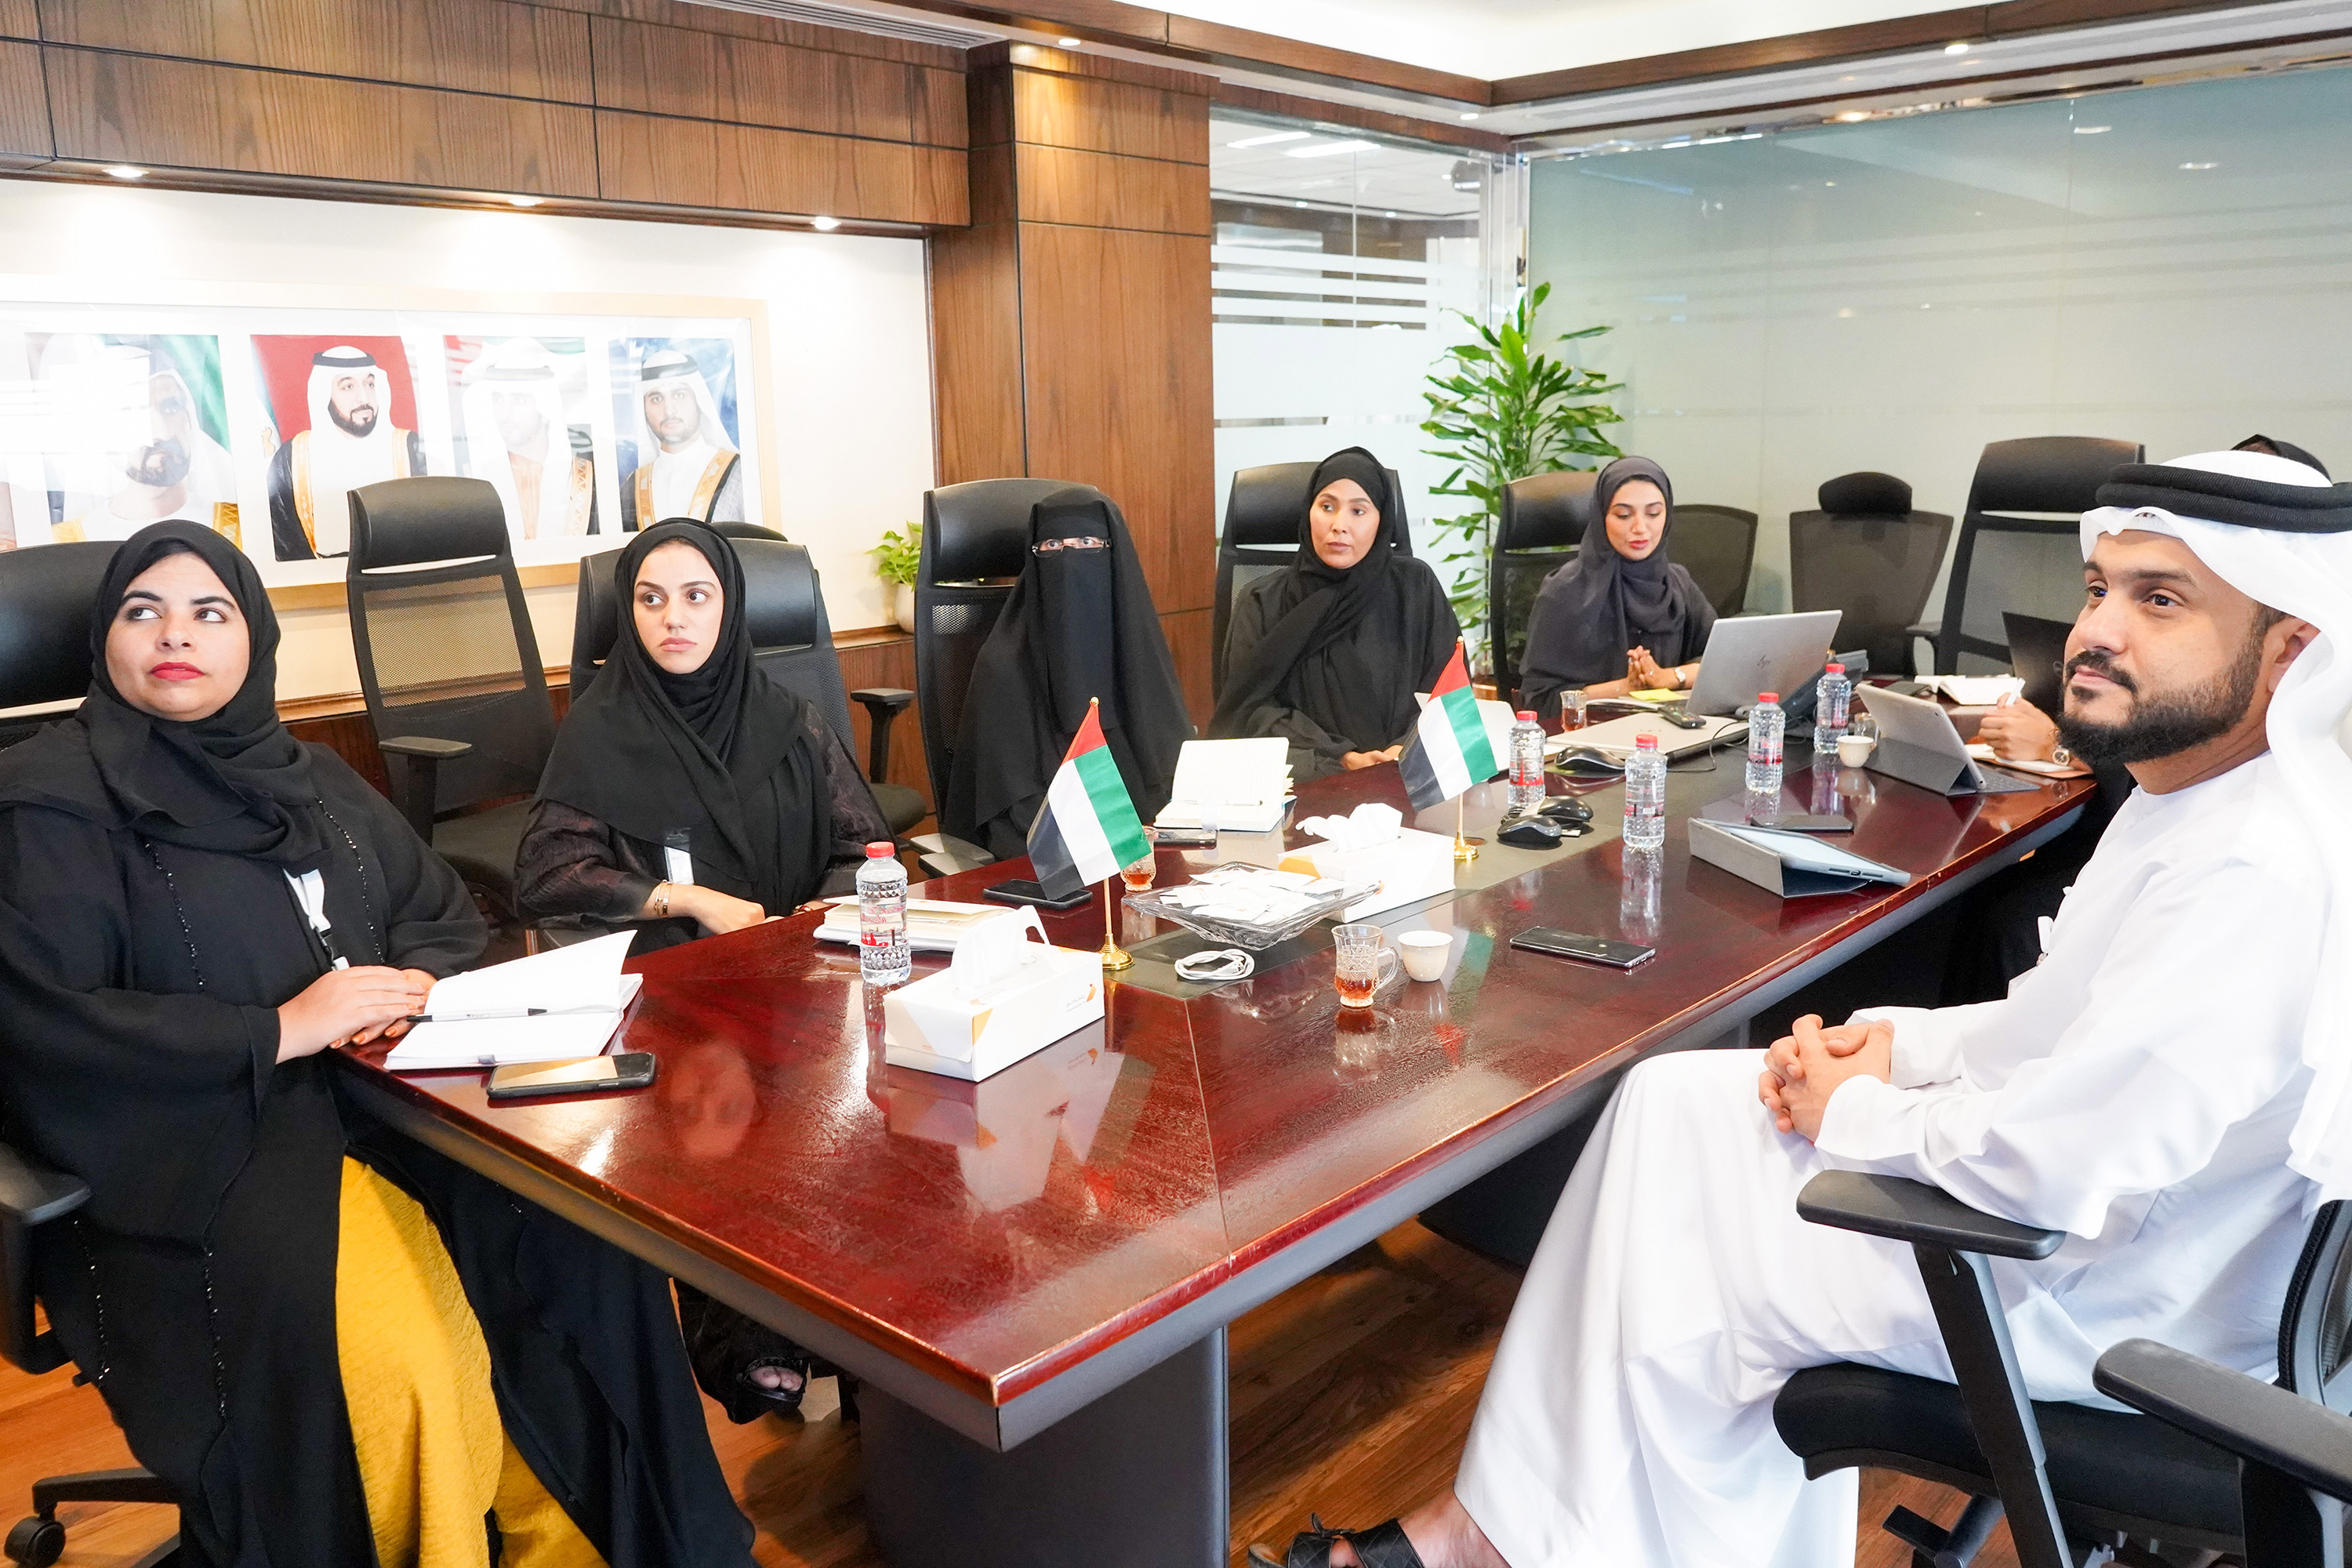 A delegation from Dubai Ambulance visited the GIS Center February 2020